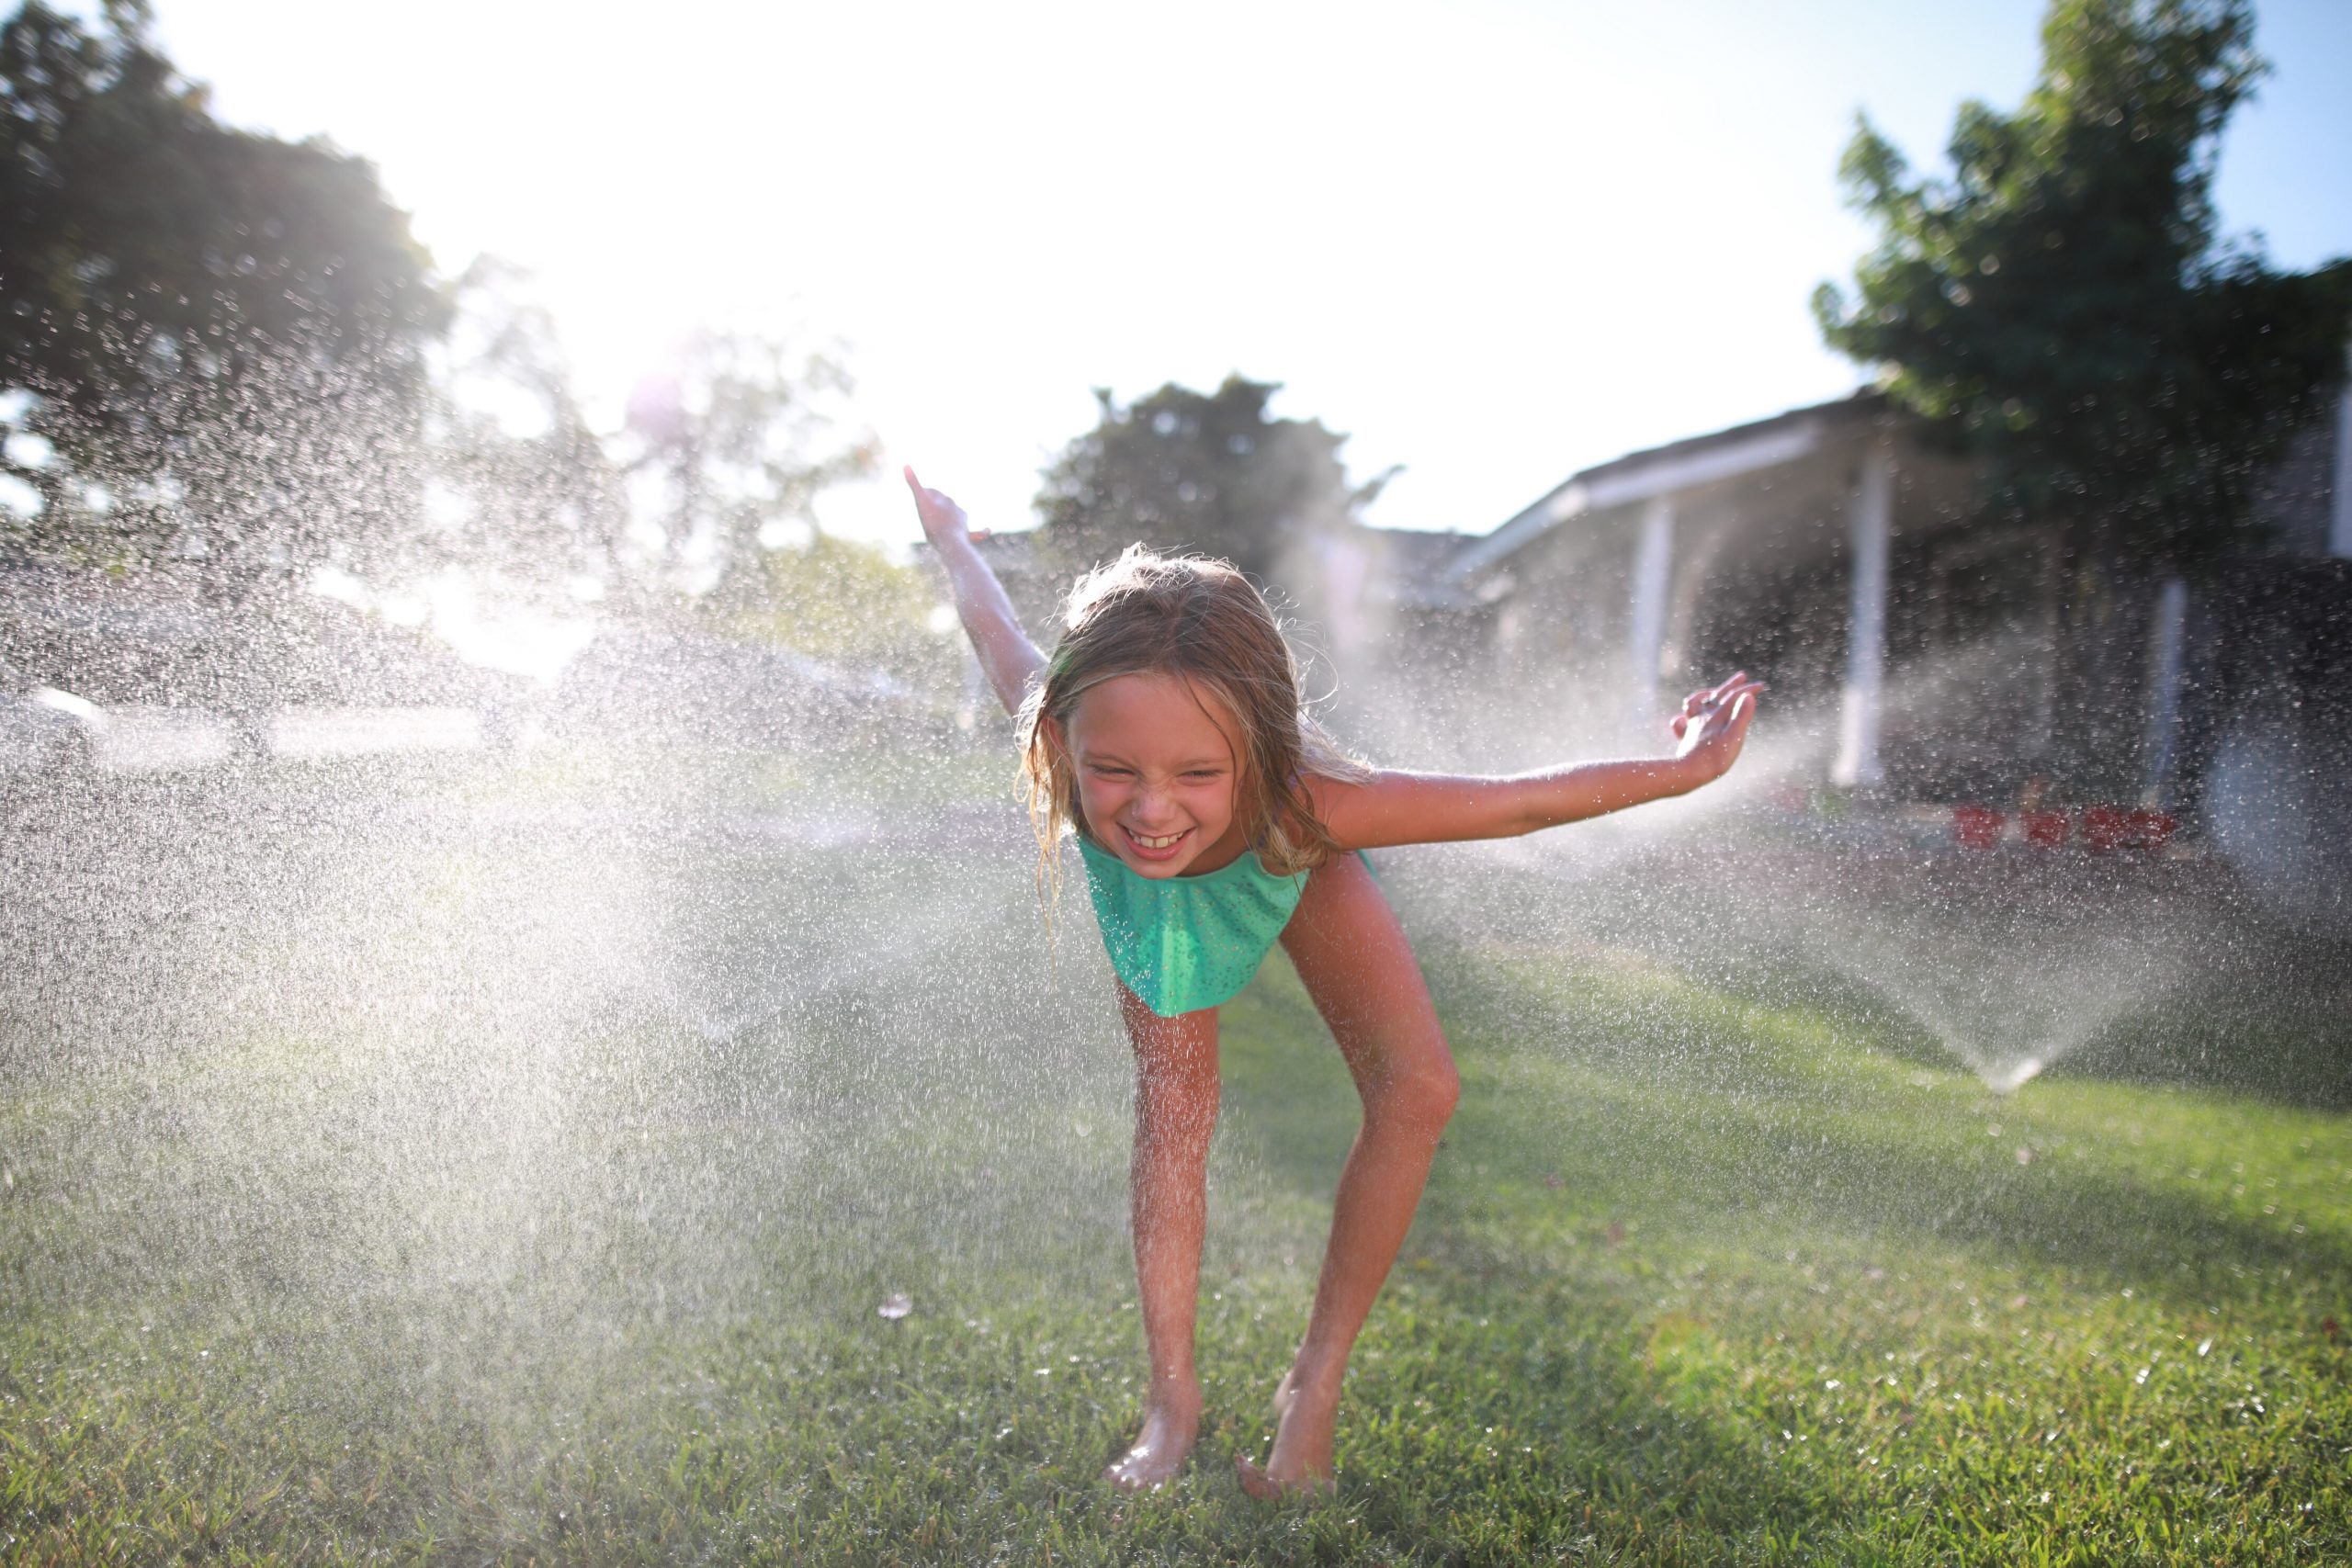 Young girl playing in sprinklers Perth Plumbing and Gasfitting